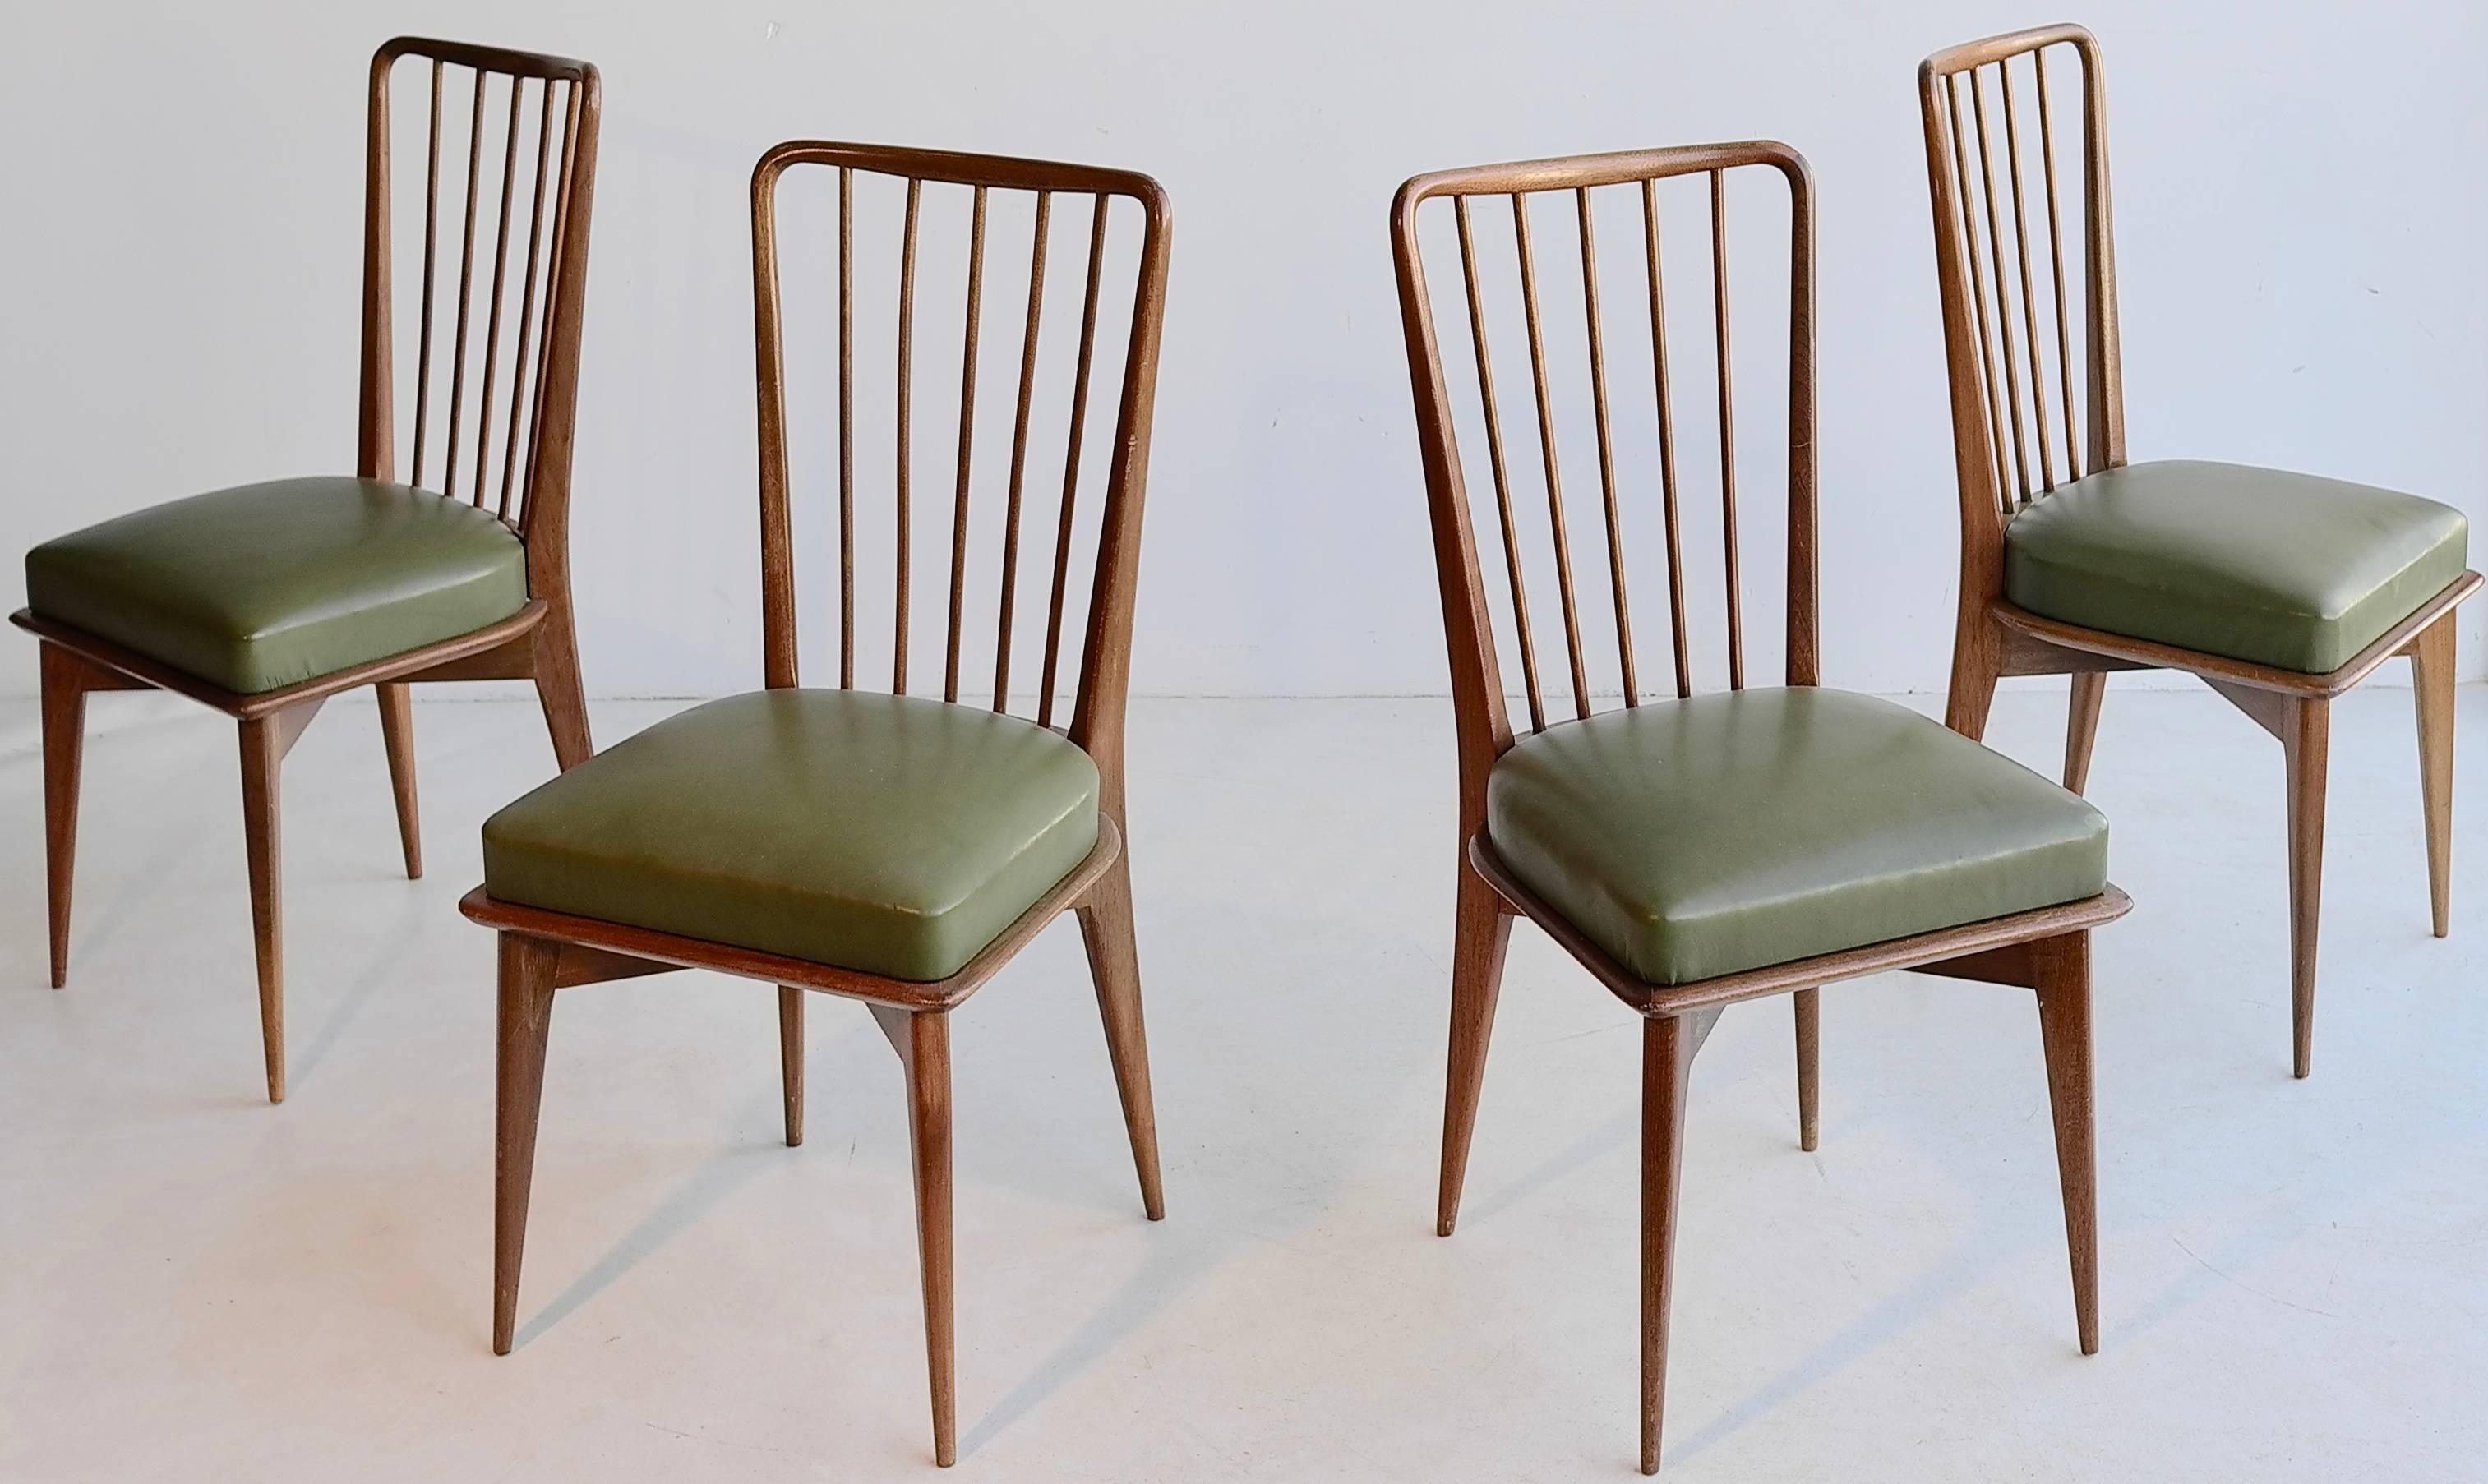 Set of four Paolo Buffa wooden dining chairs with the original green seats.